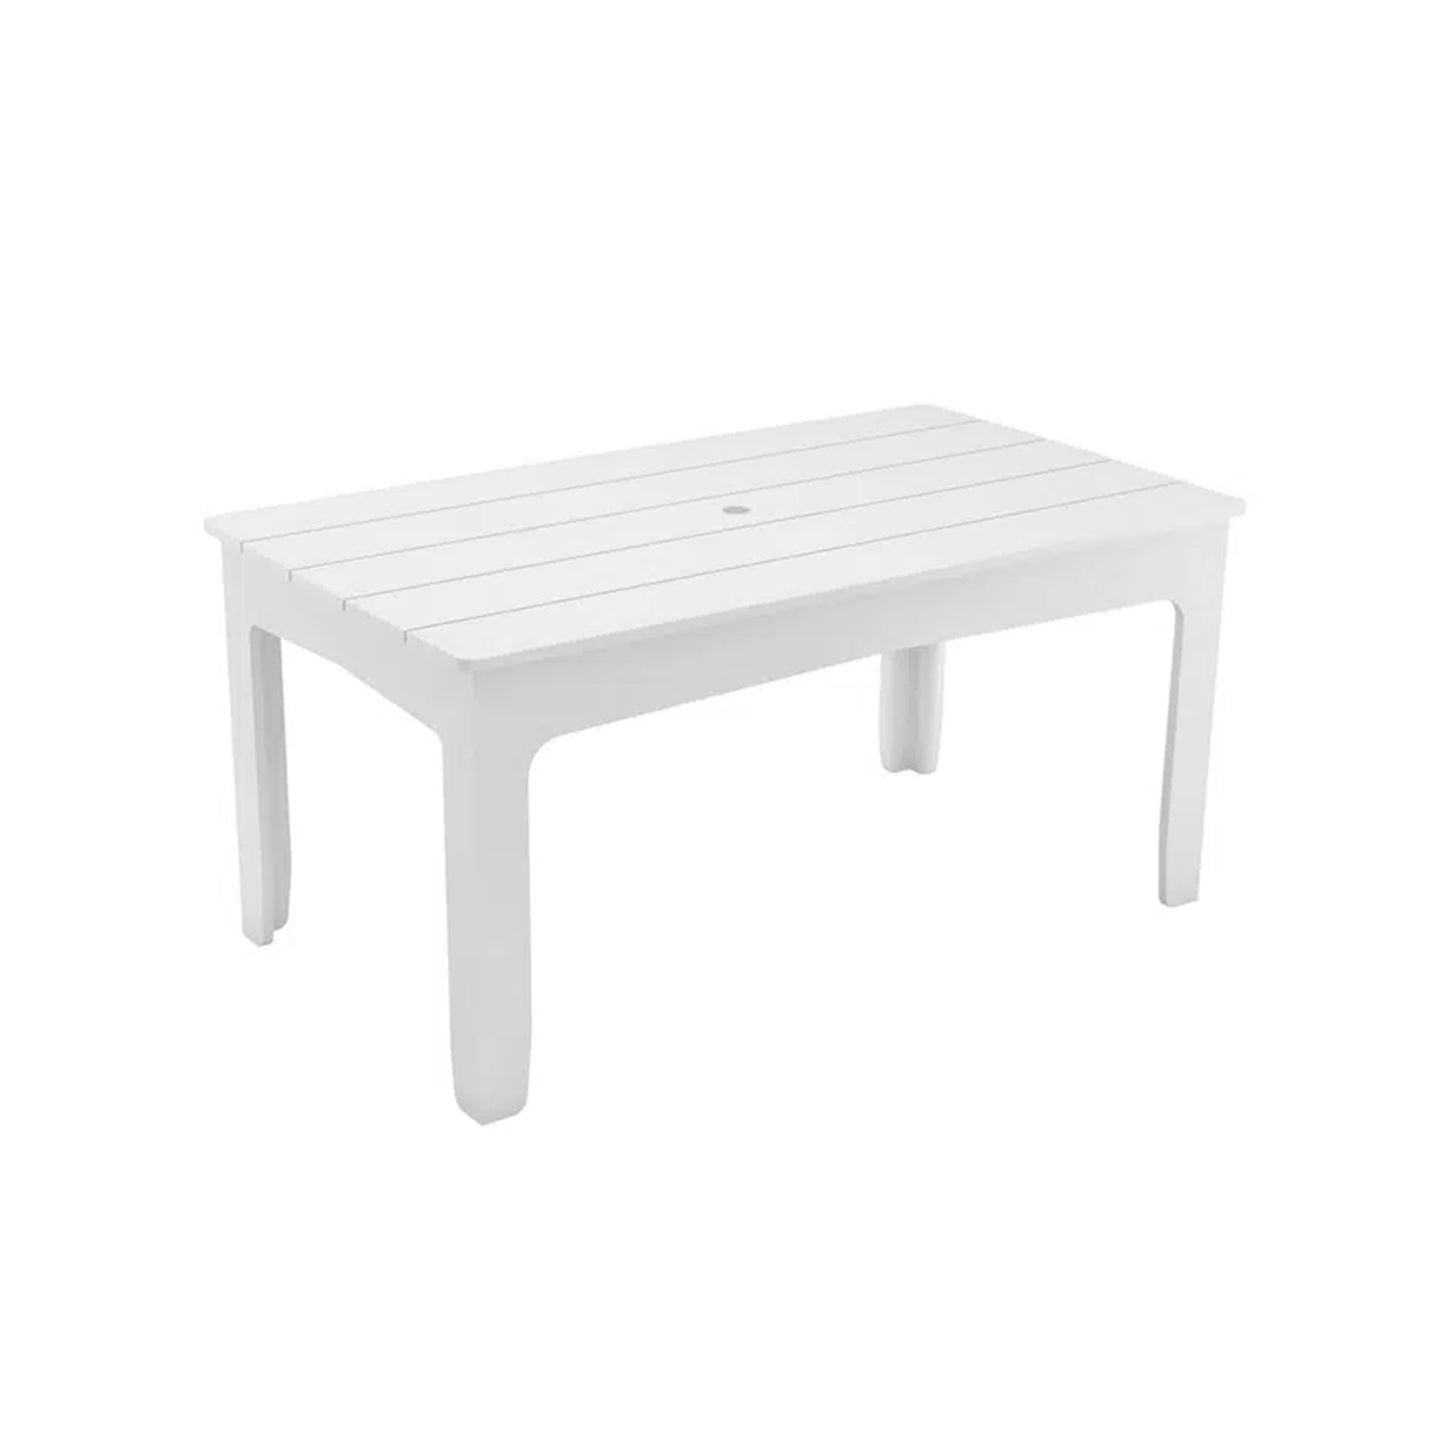 Ledge Lounger Mainstay Rectangular Dining Table